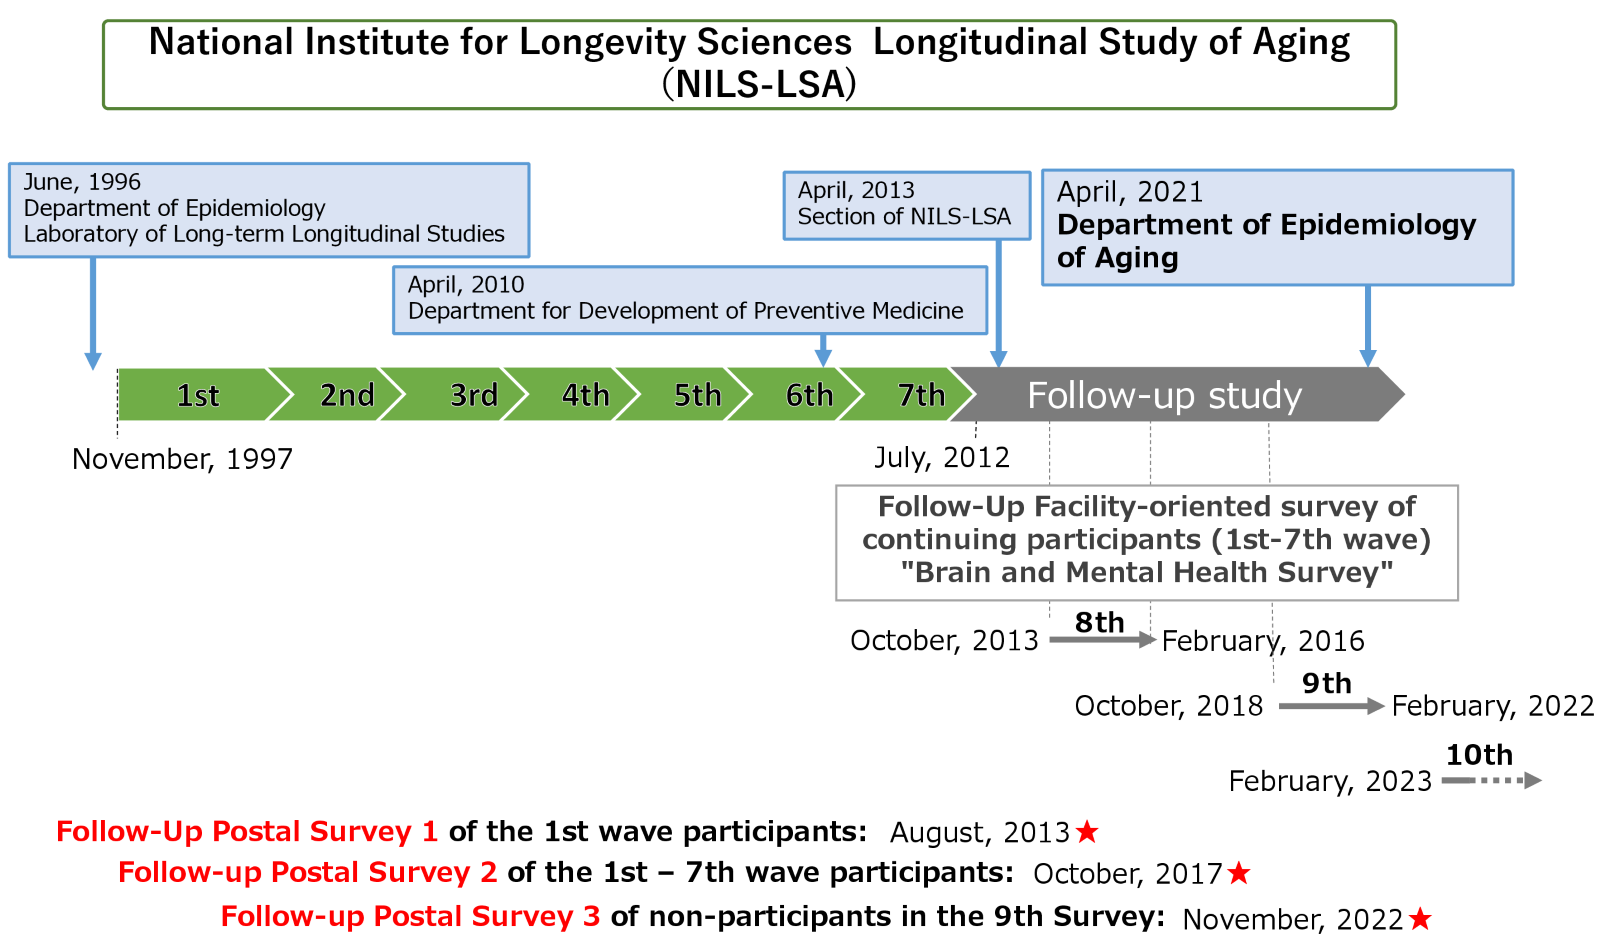 History of National Institute for Longevity Sciences Longitudinal Study of Aging (NILS-LSA): shows that its first wave of research started in 1997, and the 9th wave ended in 2022. The latest study (10th wave) started in February, 2023.